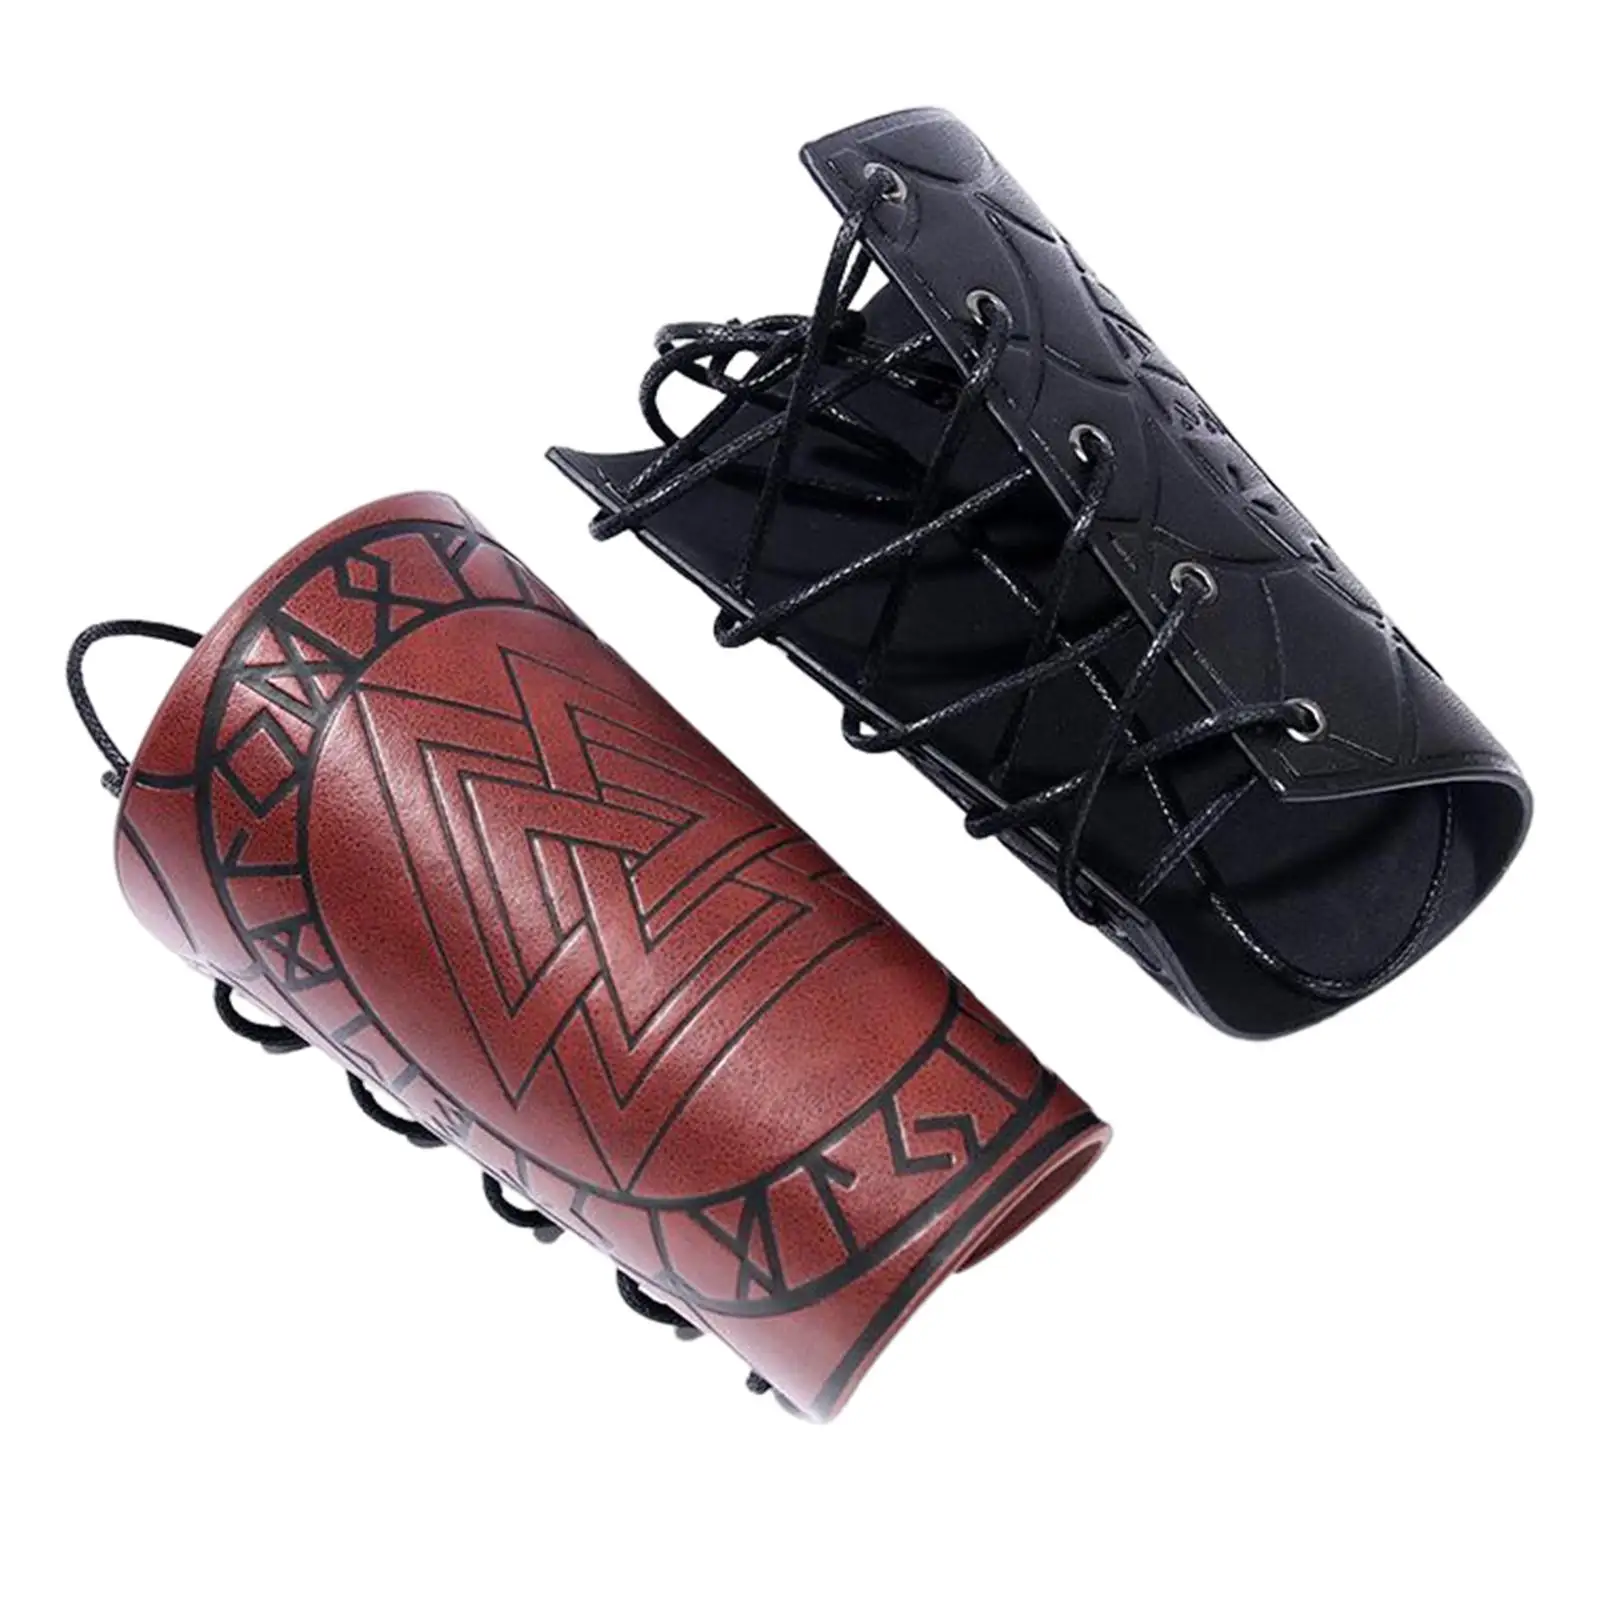 Medieval Leather Gauntlet Wristband Wrist Guard Triangle Pattern for Larp